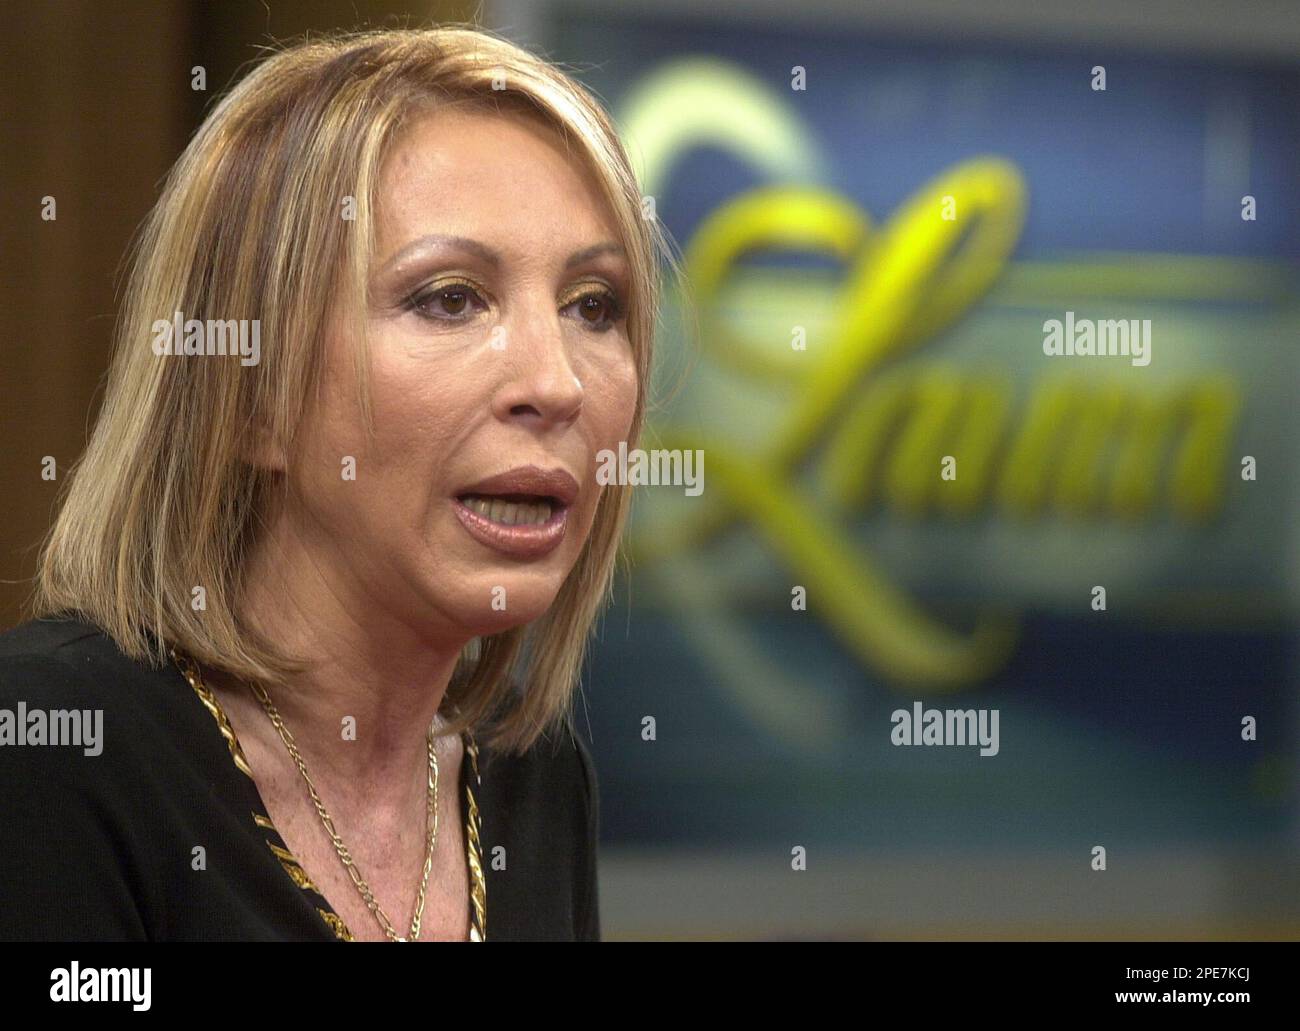 Peruvian international TV host, Laura Bozzo, gestures during an interview  with The Associated Press at her home in Lima, Peru on Thursday, April 27,  2006. Bozzo said that her work with Telemundo